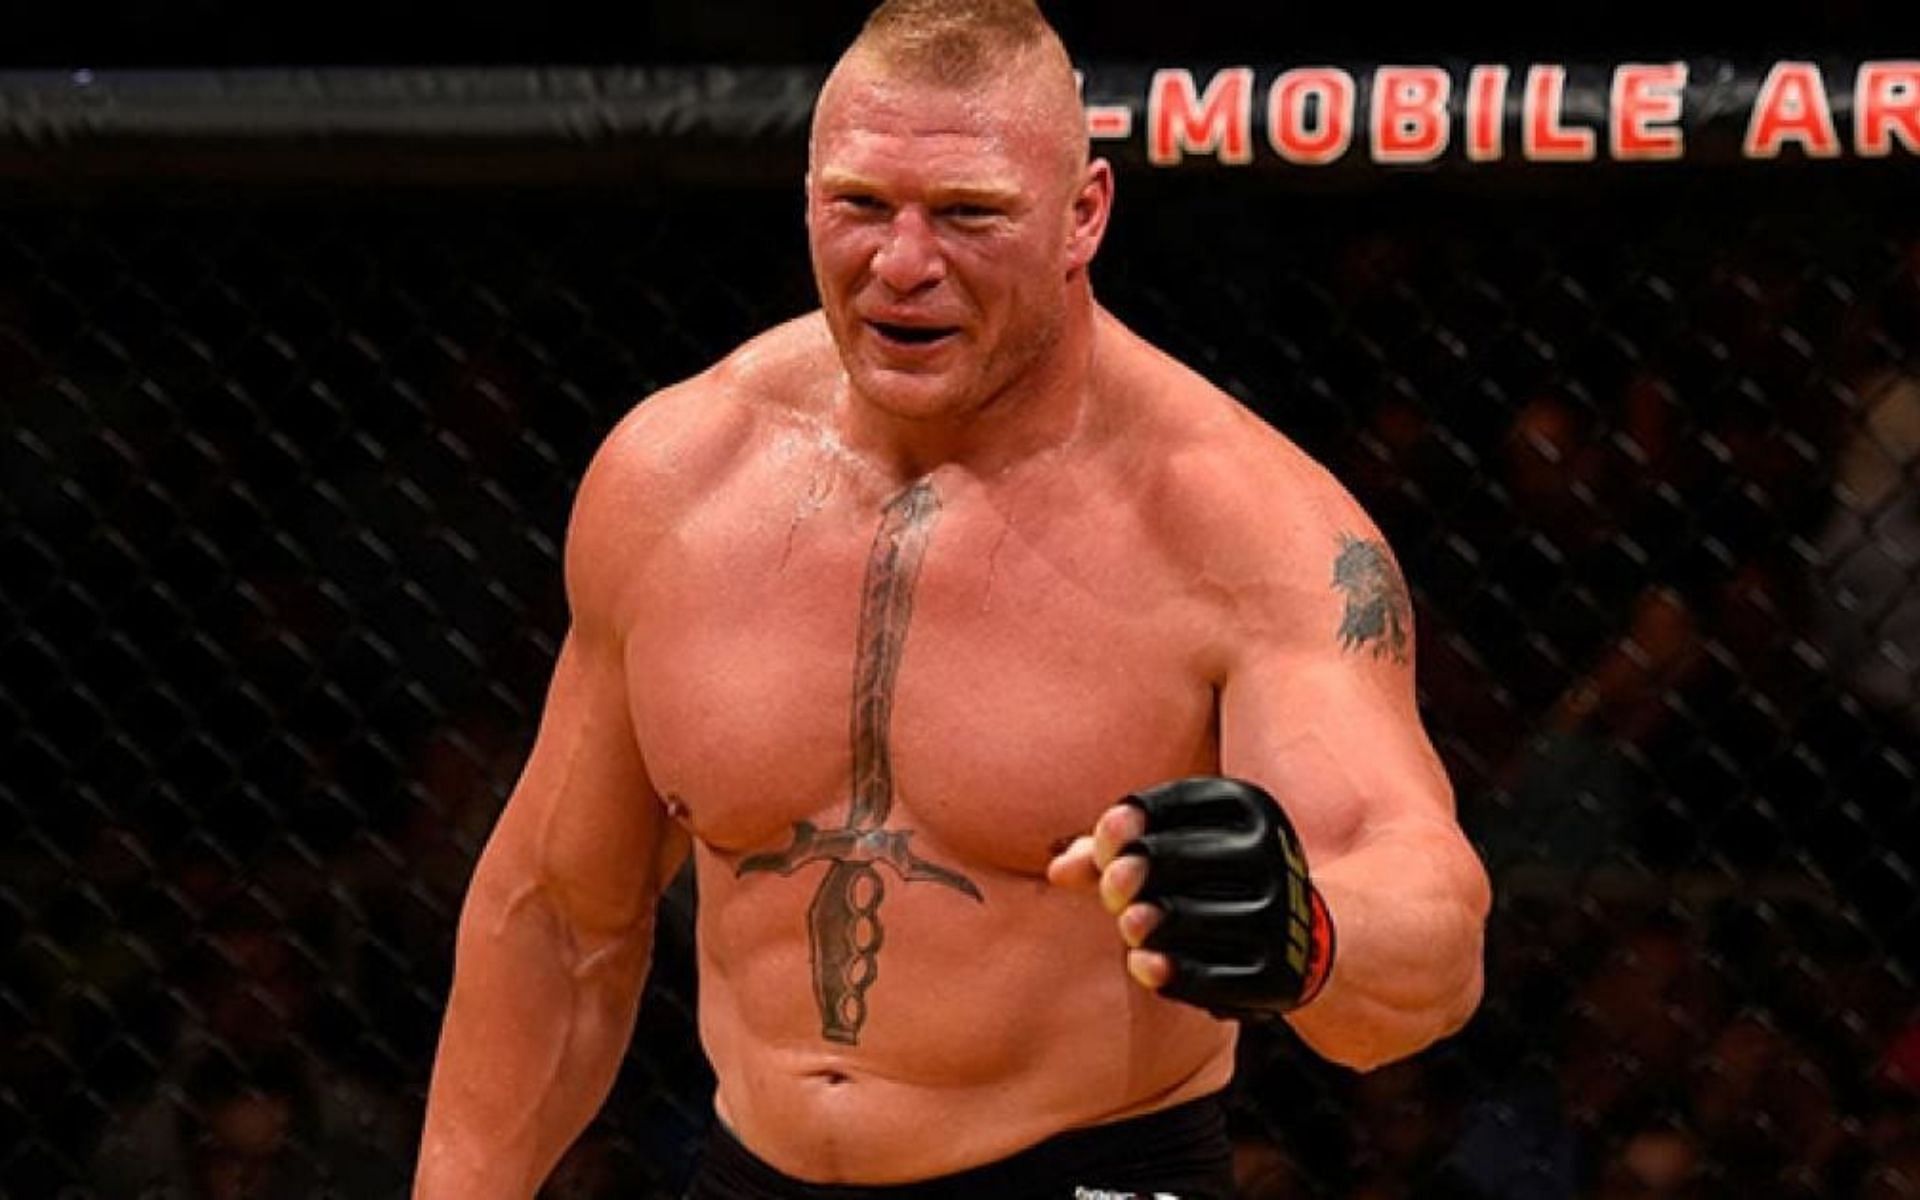 Brock Lesnar arguably did not deserve his 2008 shot at the heavyweight title